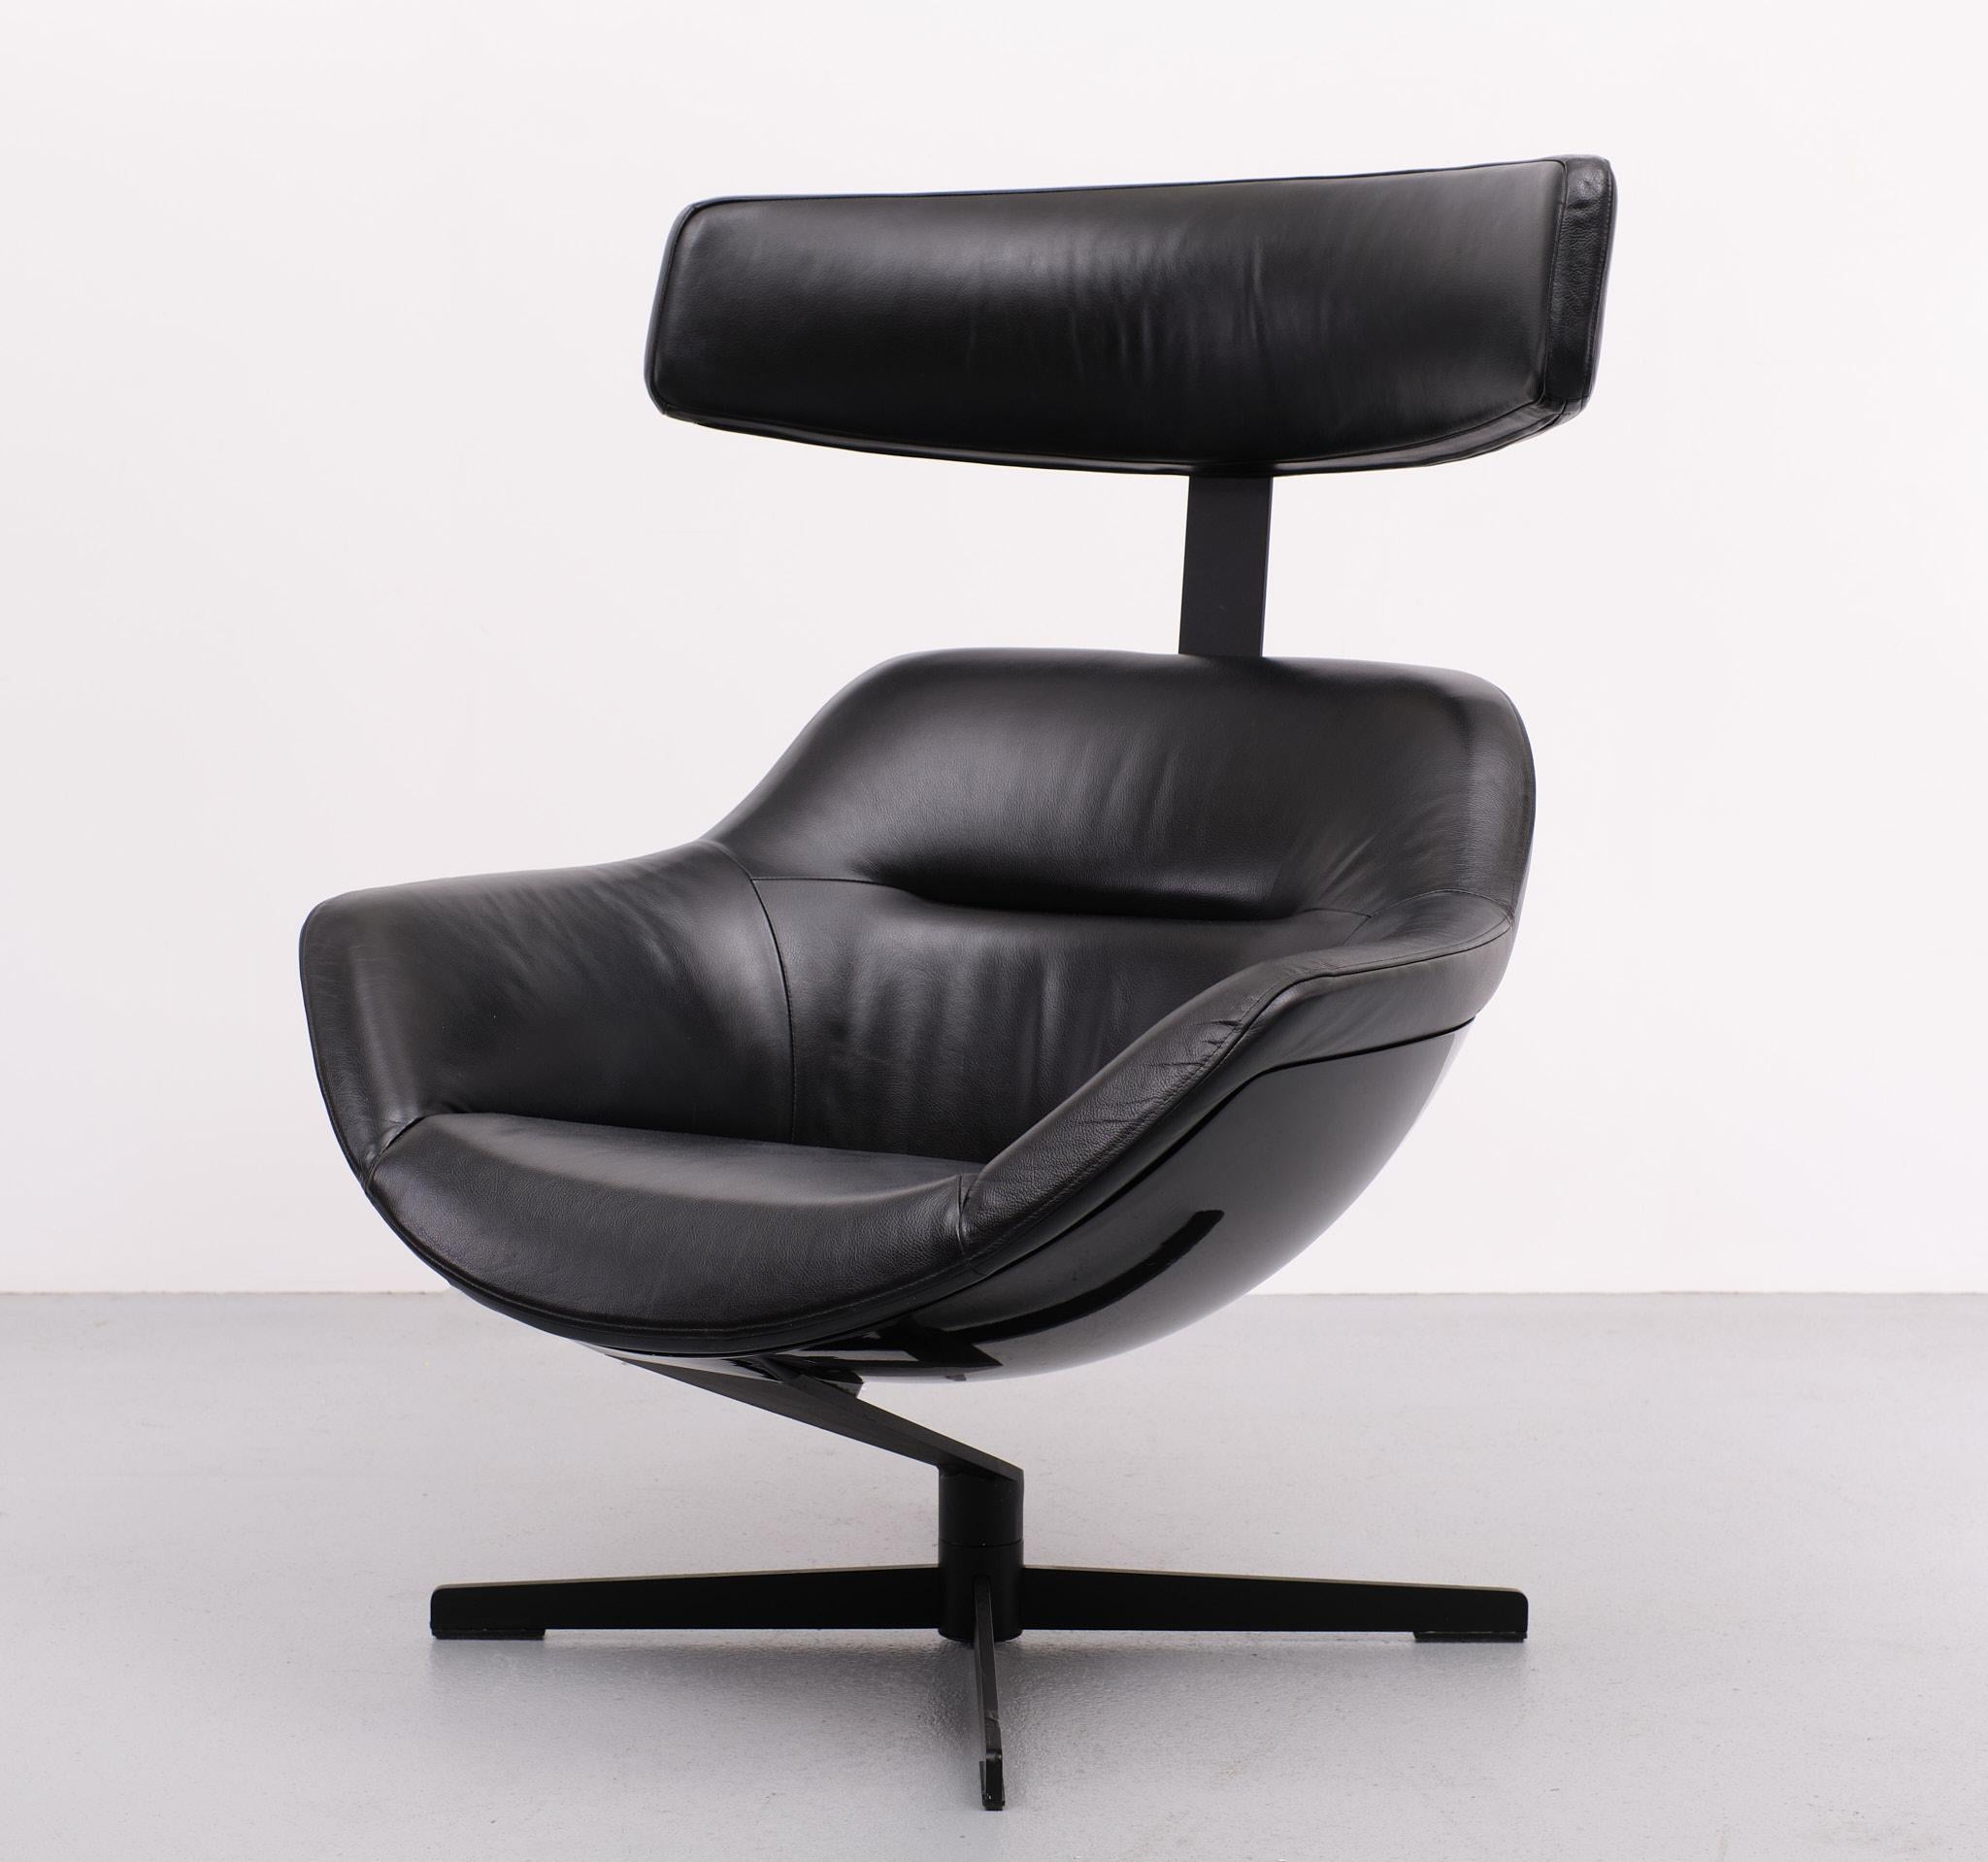 Fiberglass  The 277 Auckland Lounge chair  Designed by Jean Marie Massaud  for  Cassina 